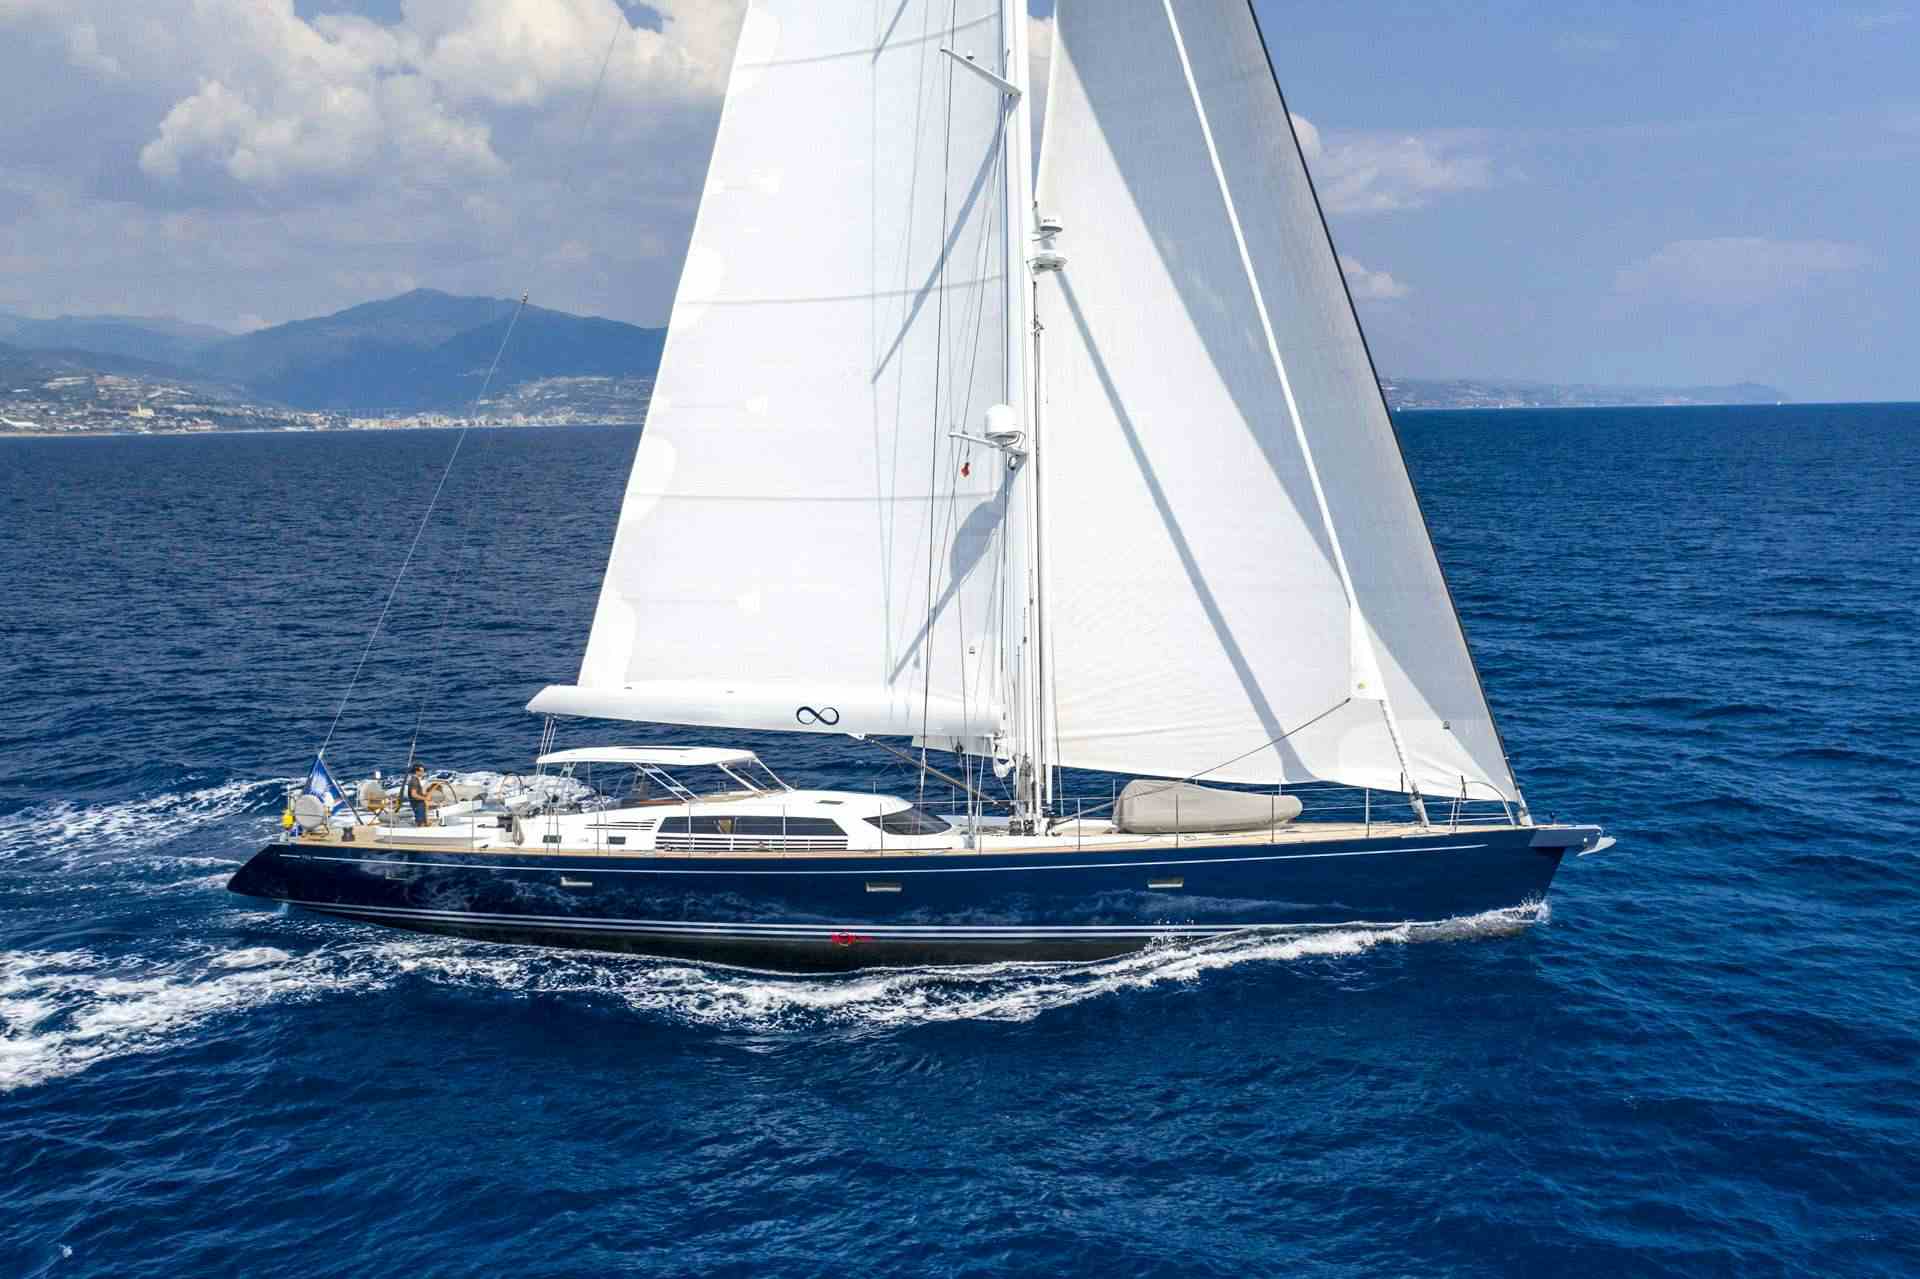 LADY 8 - Sailboat Charter The Canaries & Boat hire in W. Med -Naples/Sicily, W. Med -Riviera/Cors/Sard., Caribbean Leewards, Caribbean Windwards, Turkey, W. Med - Spain/Balearics, Caribbean Leewards, Caribbean Windwards 1